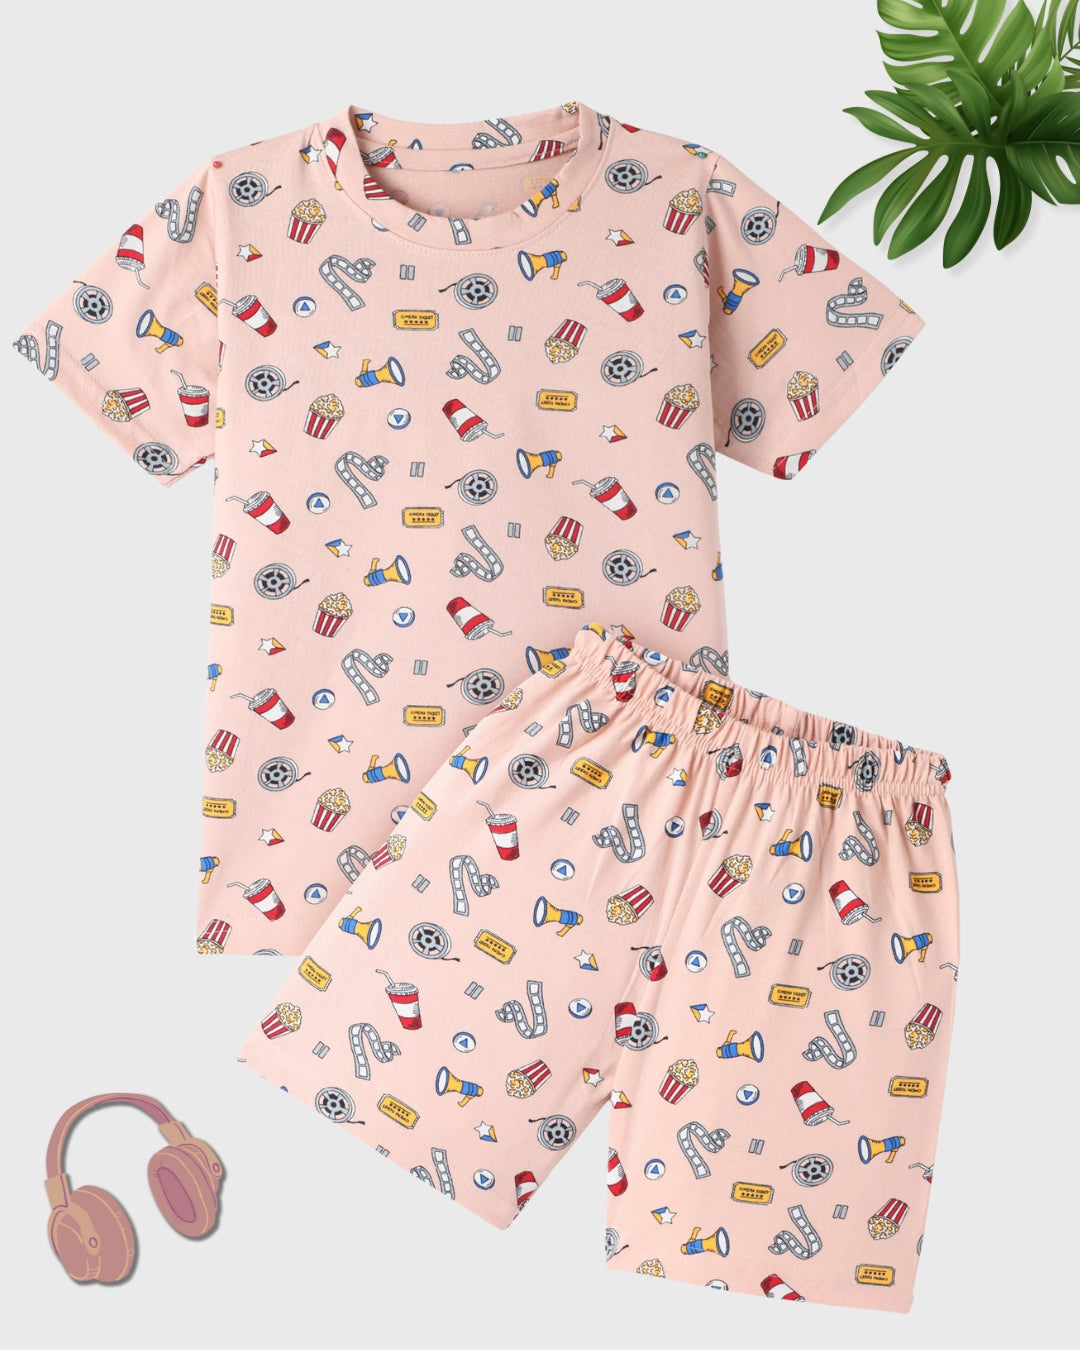 Grey & Peach Pure Cotton Half Sleeves Printed Shorts Set for Girls - Pack of 2